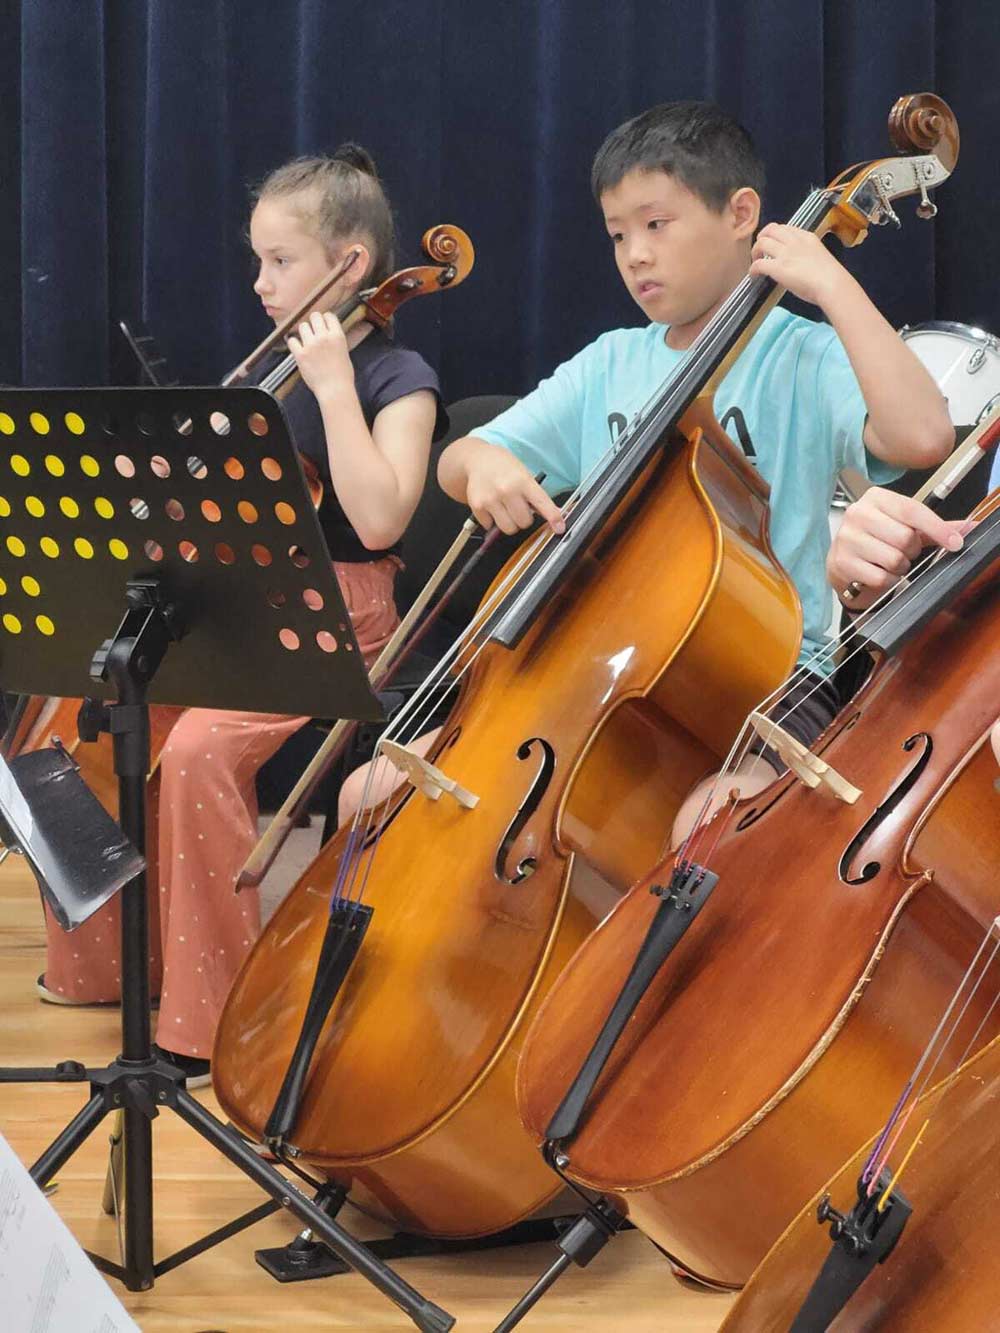 Cello and Double bass